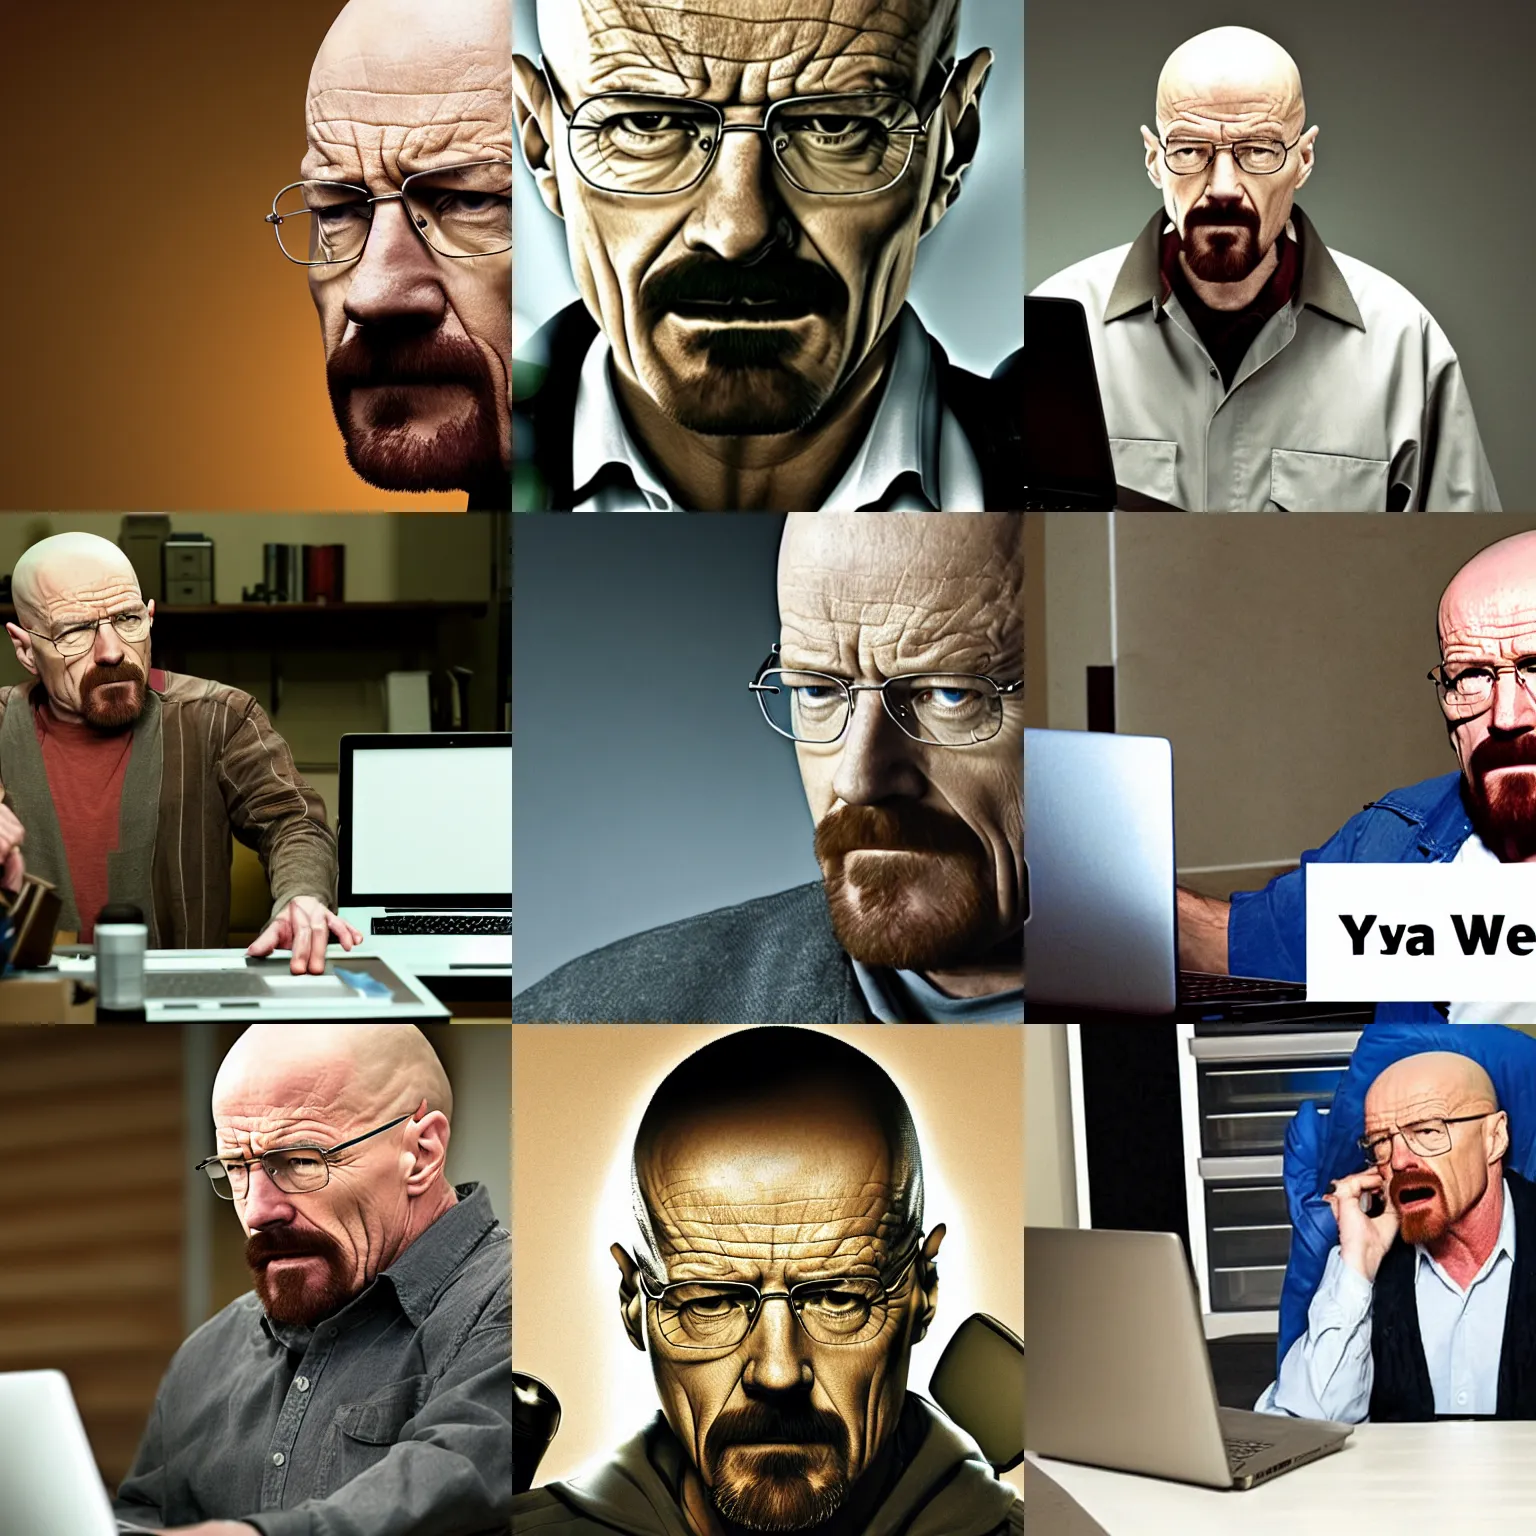 Prompt: walter white from breaking bad is angry and yells at his laptop screen